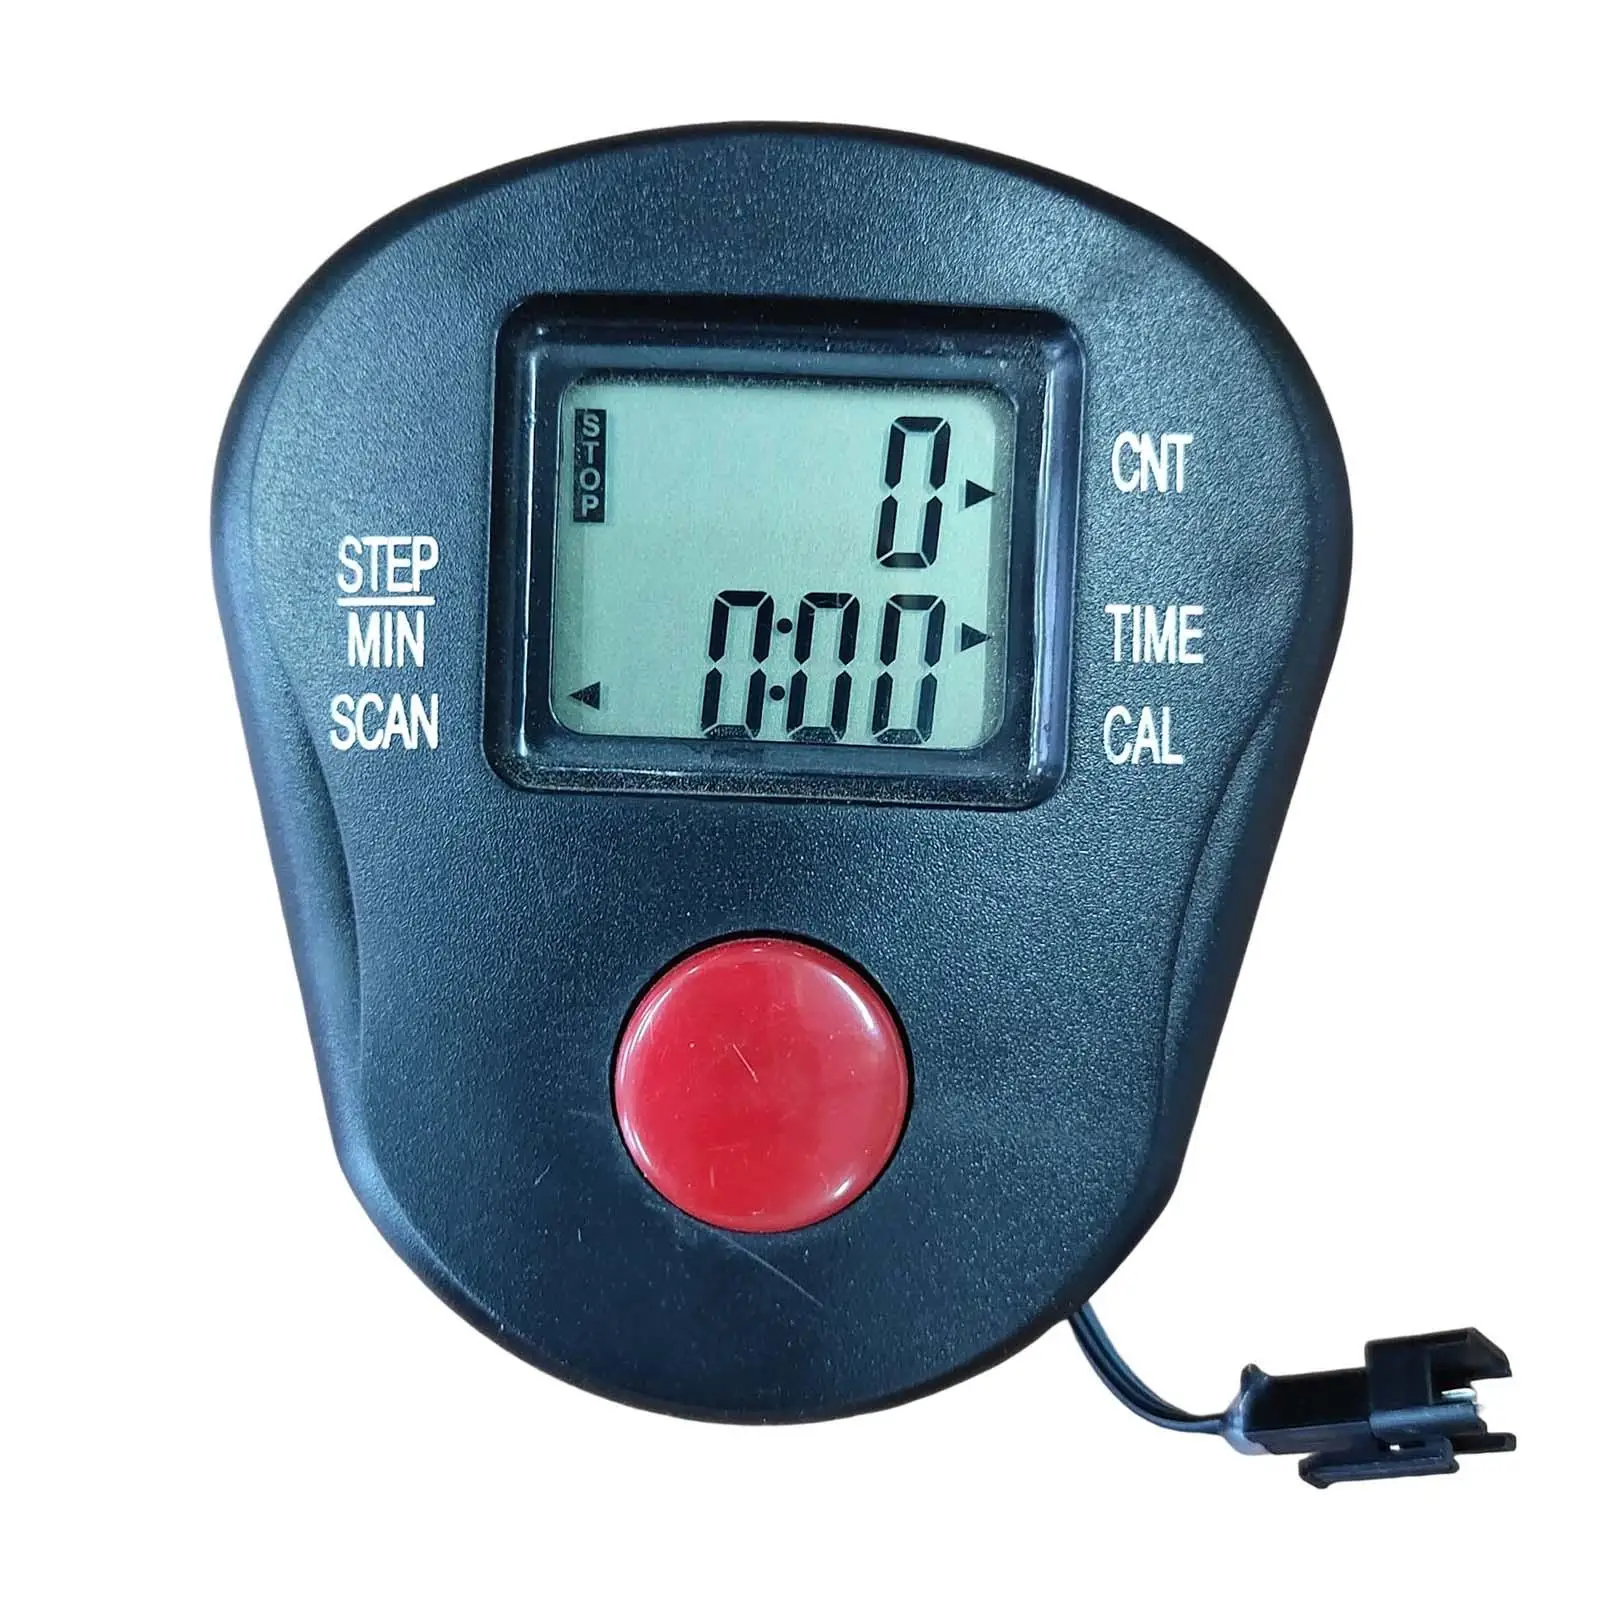 Replacement Monitor Speedometer Stable for Stepper Riding Waist Shaping Machine Counter